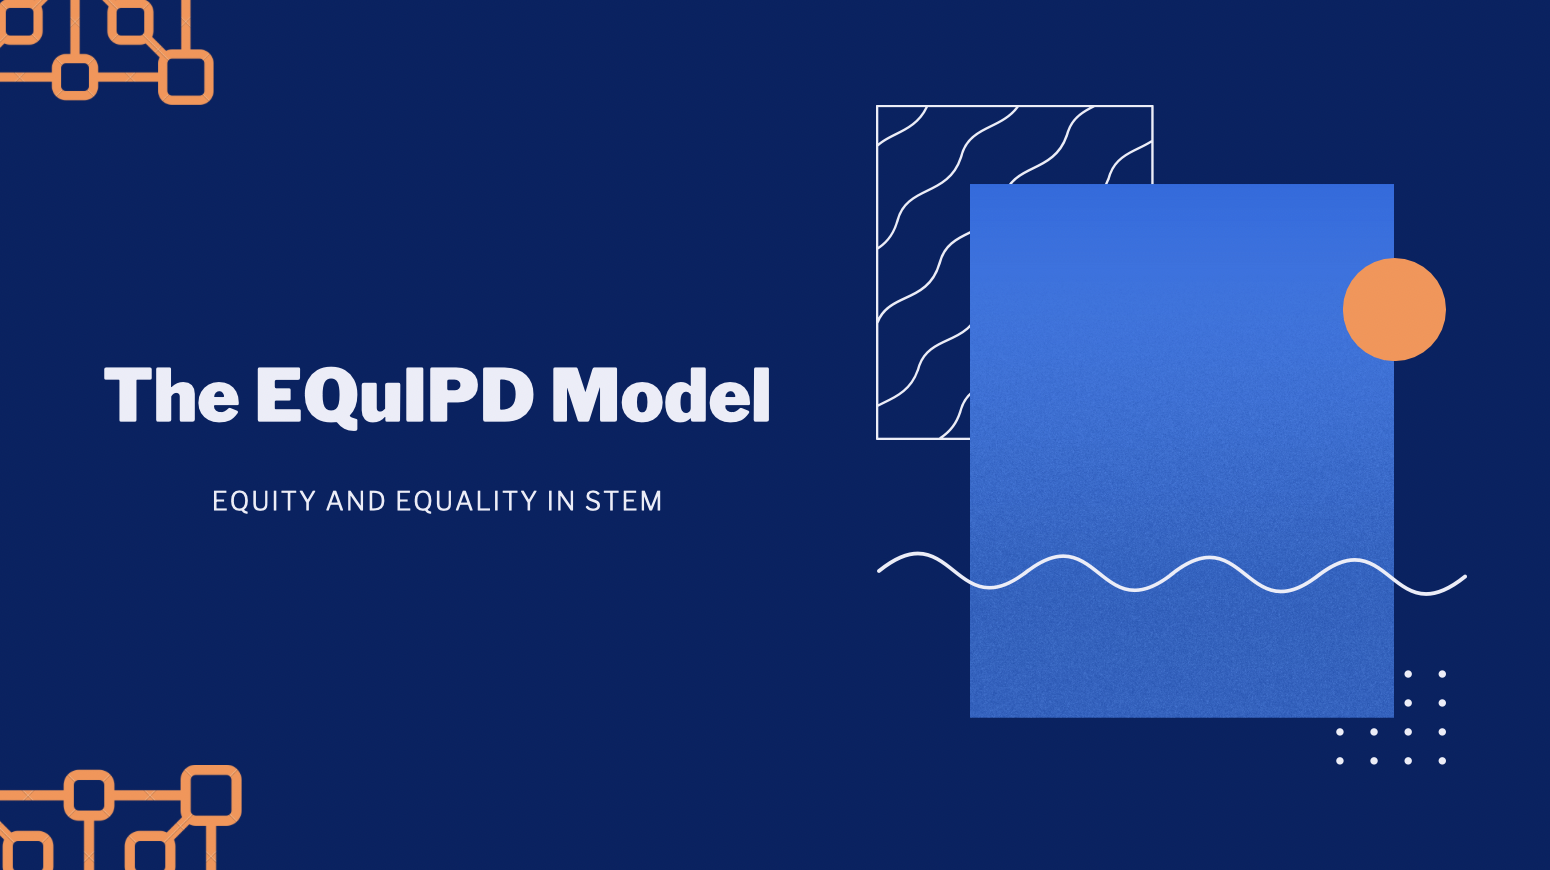 The EQuIPD Model